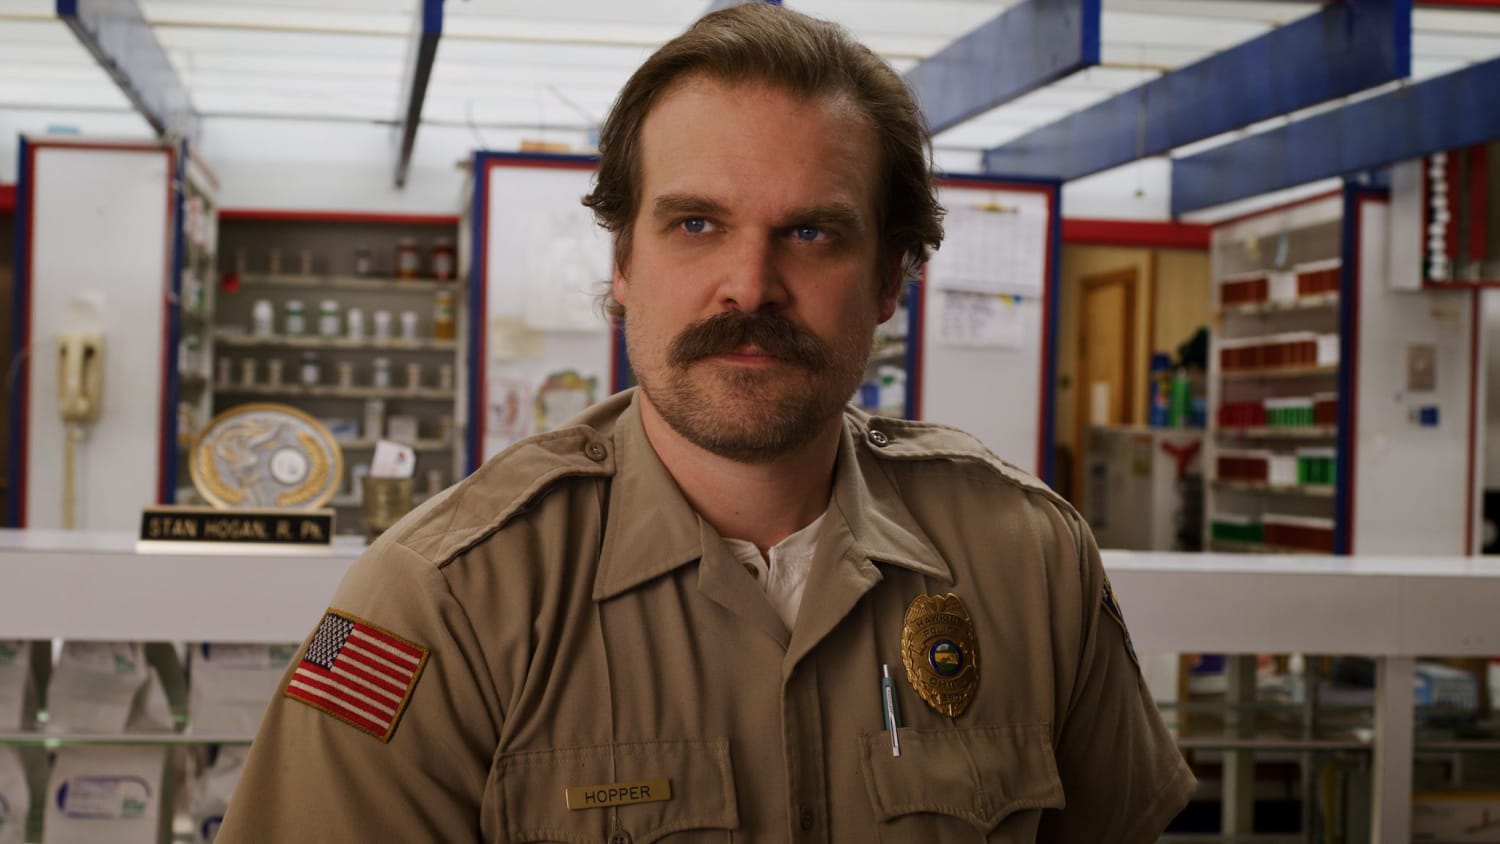 A Star Wars Connection Might Predict Jim Hopper's Future in Stranger Things